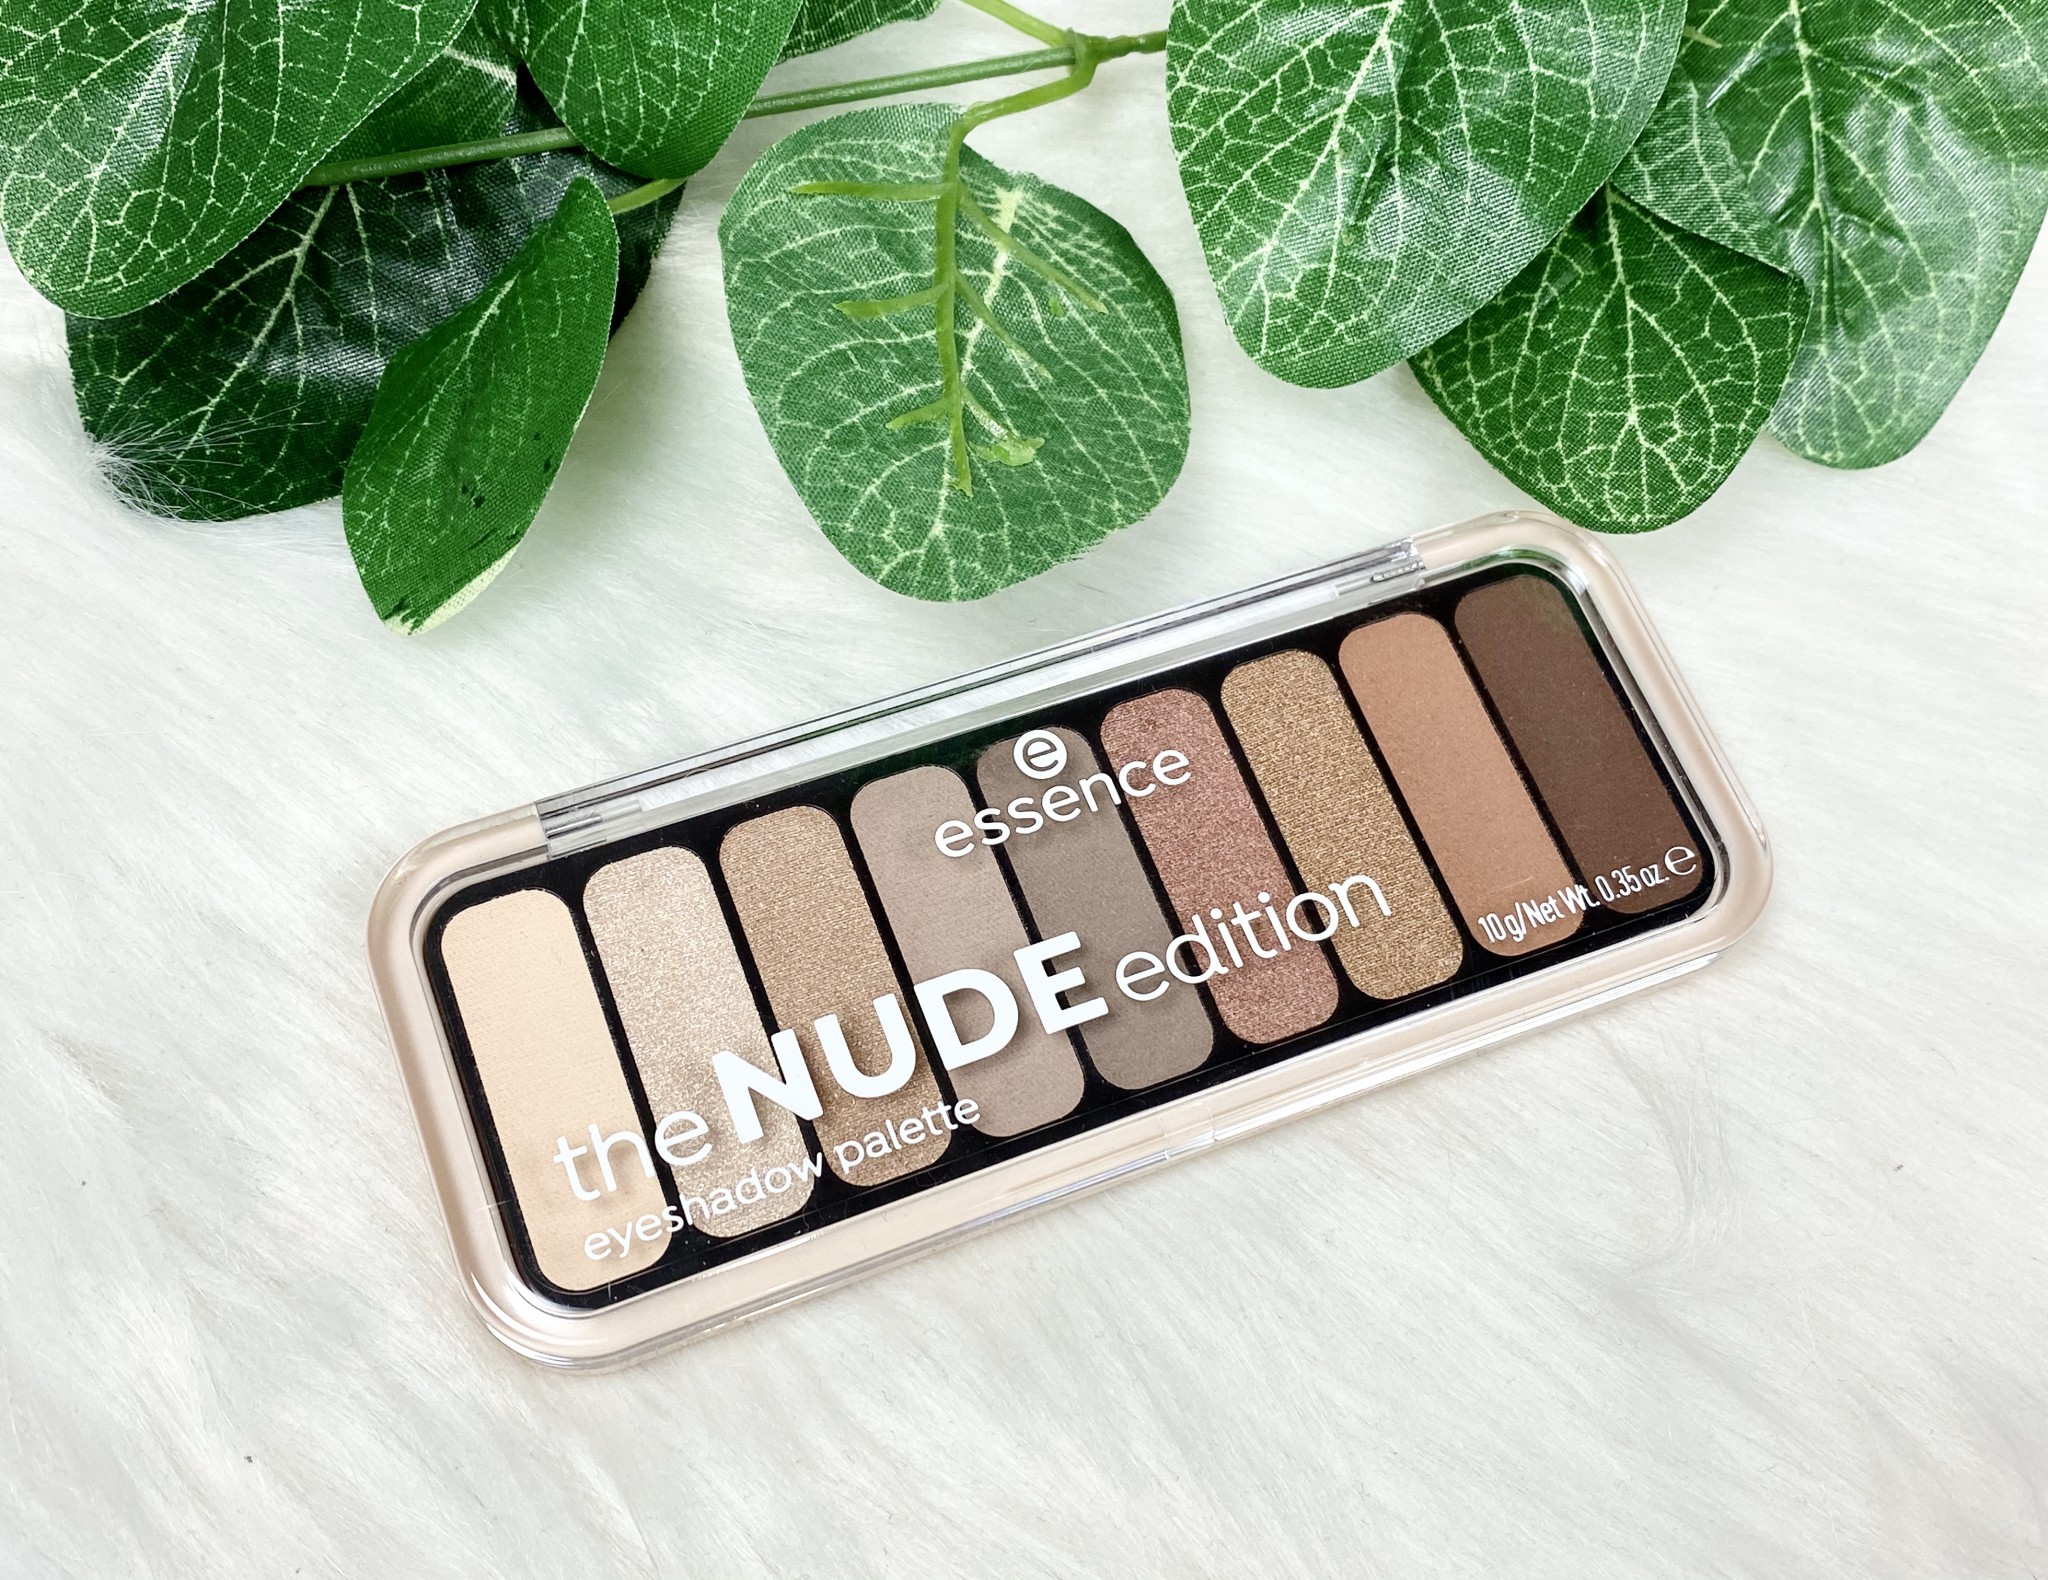 REVIEW Essence The Nude Edition Eyeshadow Palette